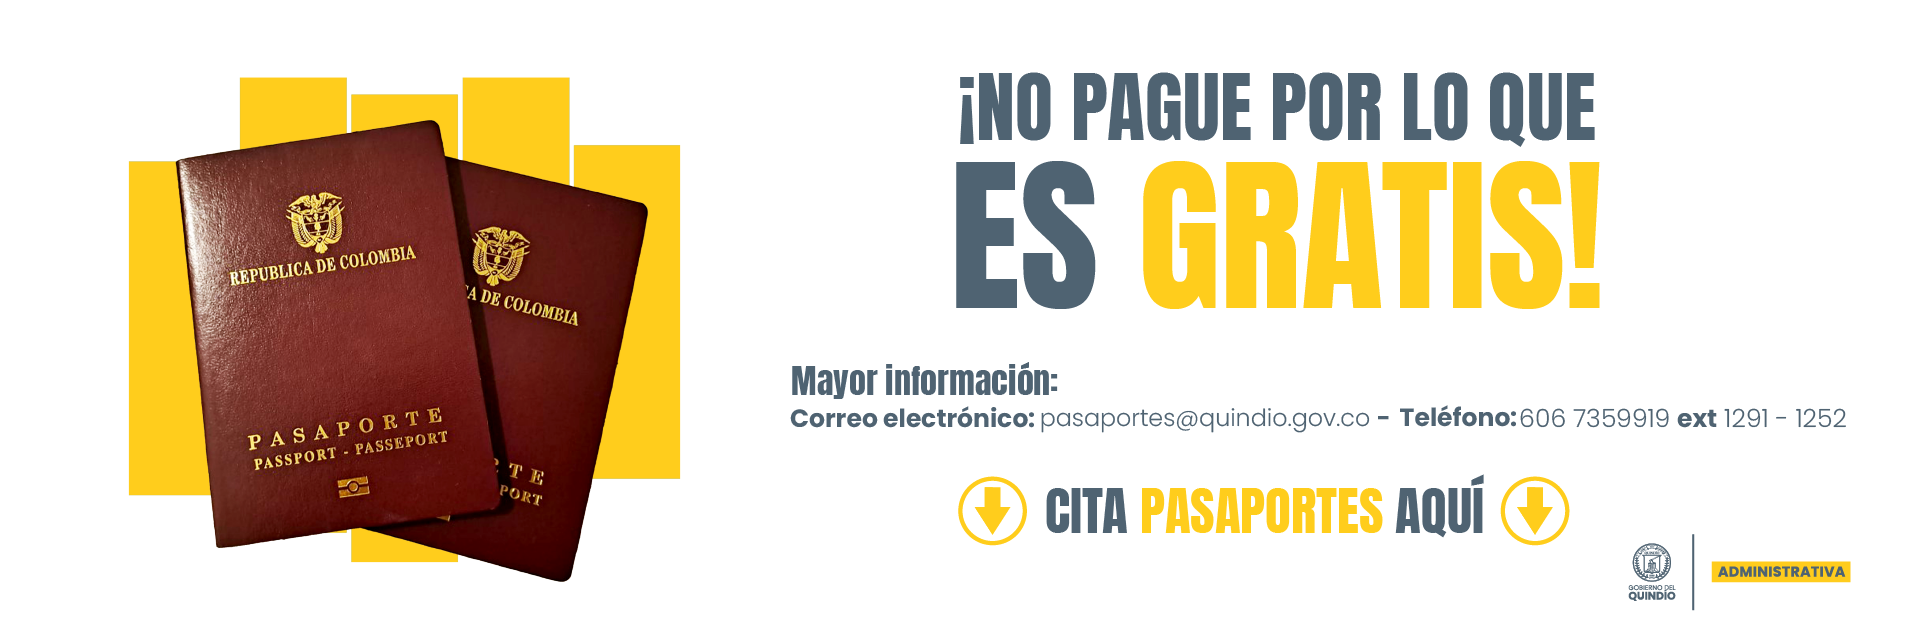 banner-pasaporte.png - 371.89 kB